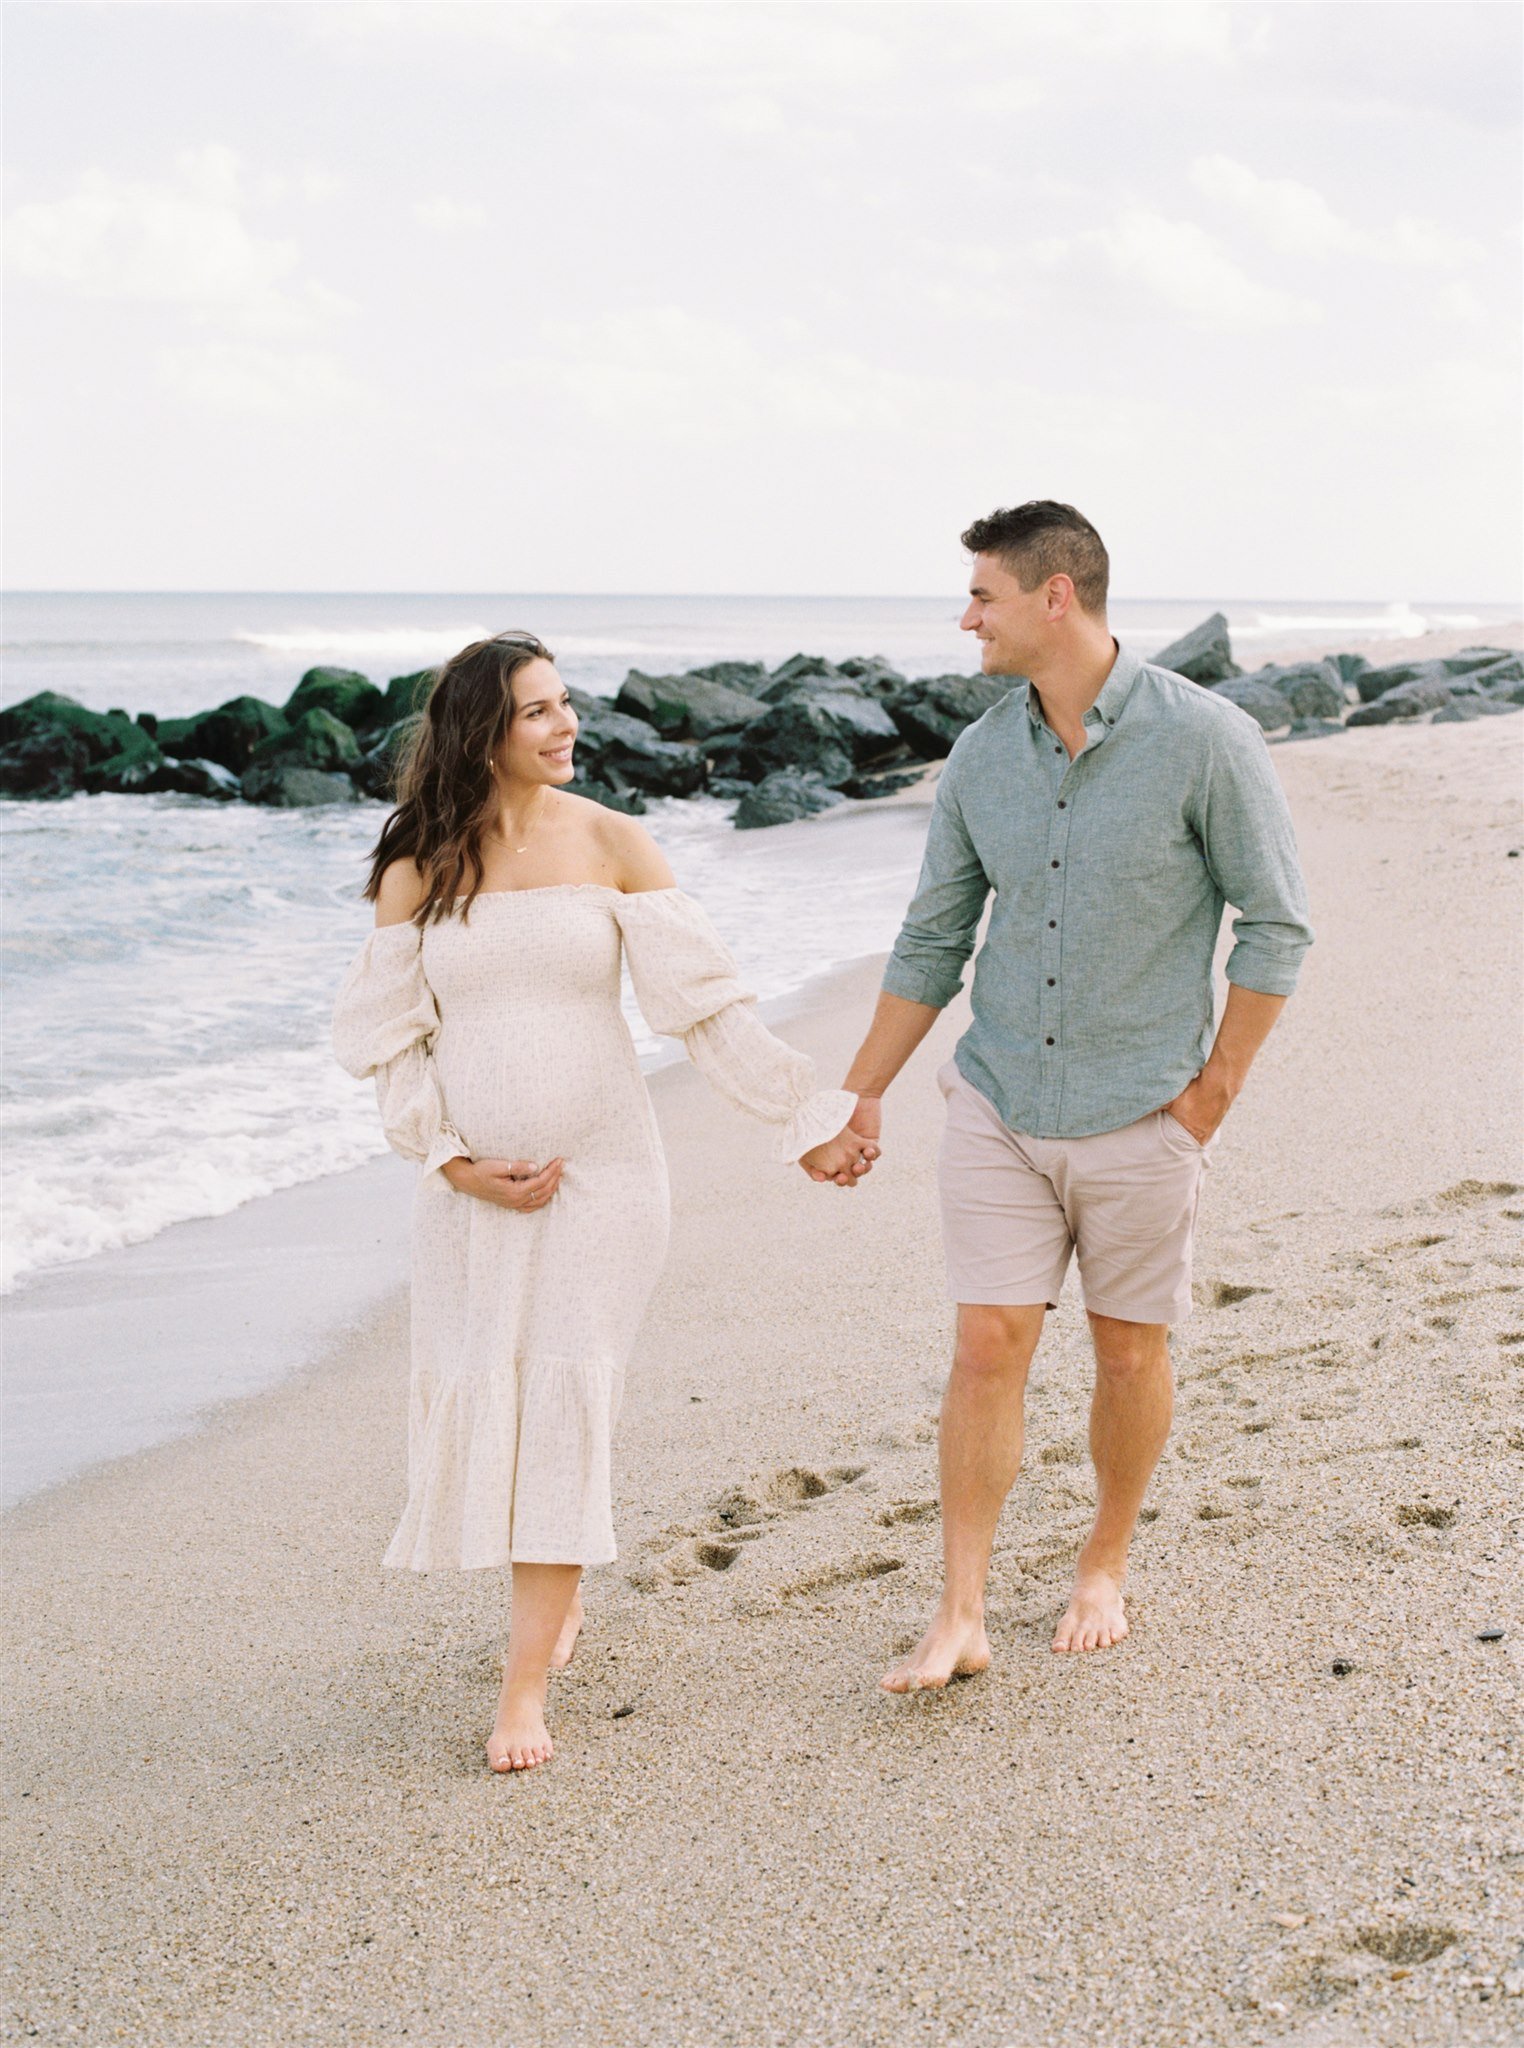 Pregnant woman cradling belly while holding hands with man on beach during Miami maternity session